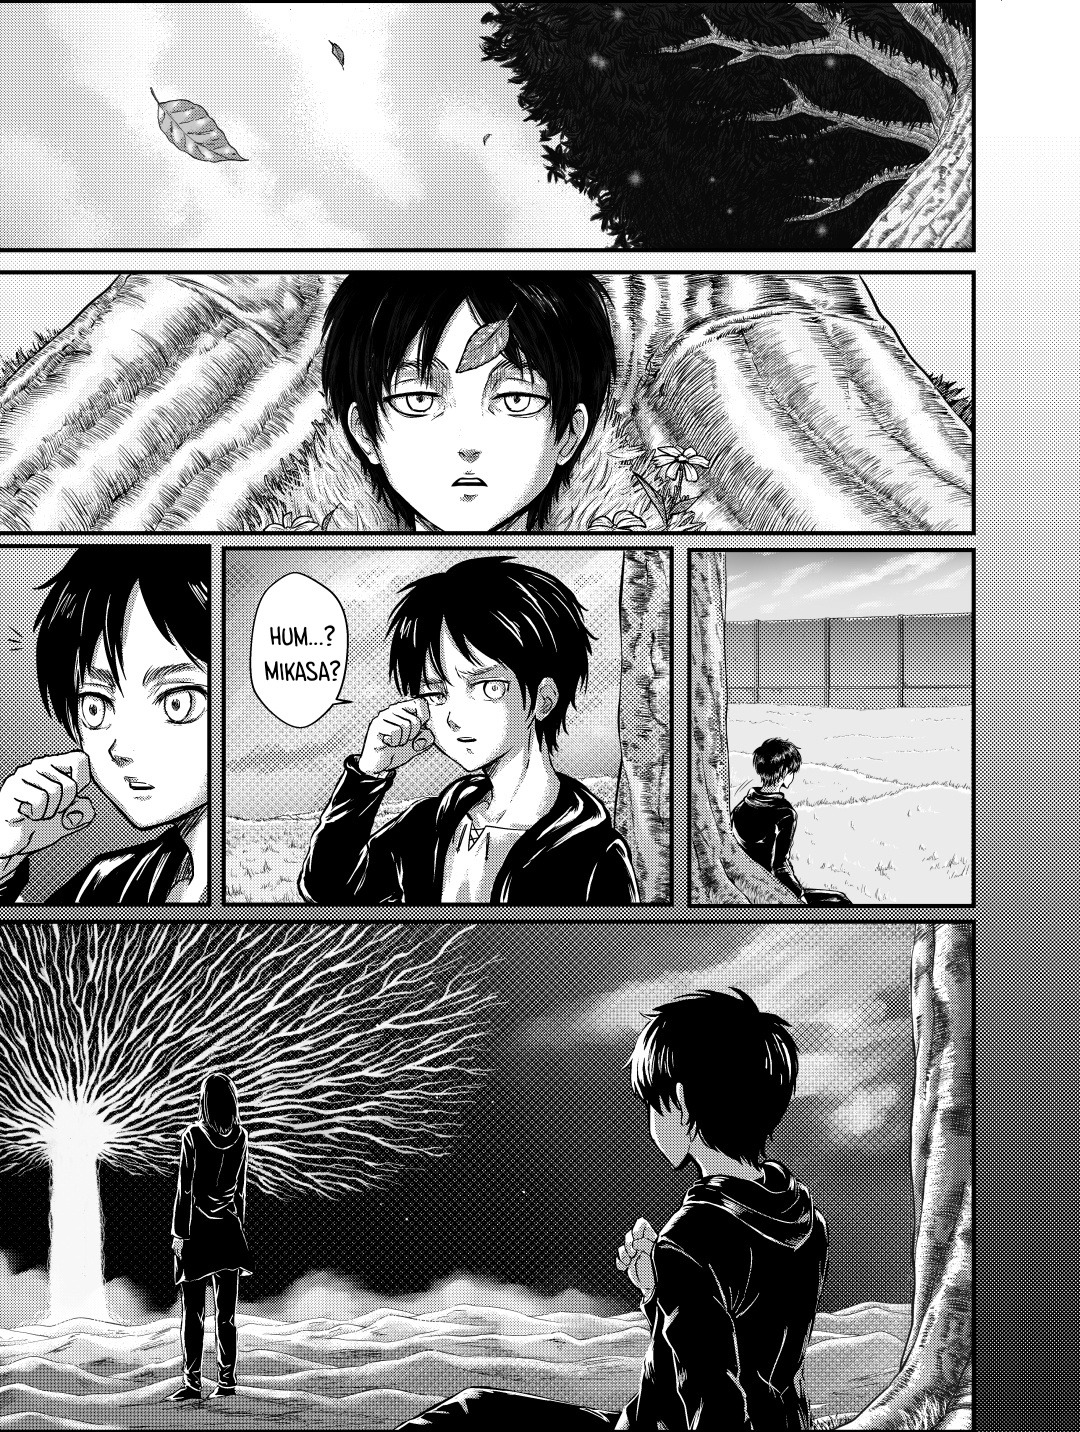 AoT No Requiem: Chapter 1 - Page 1